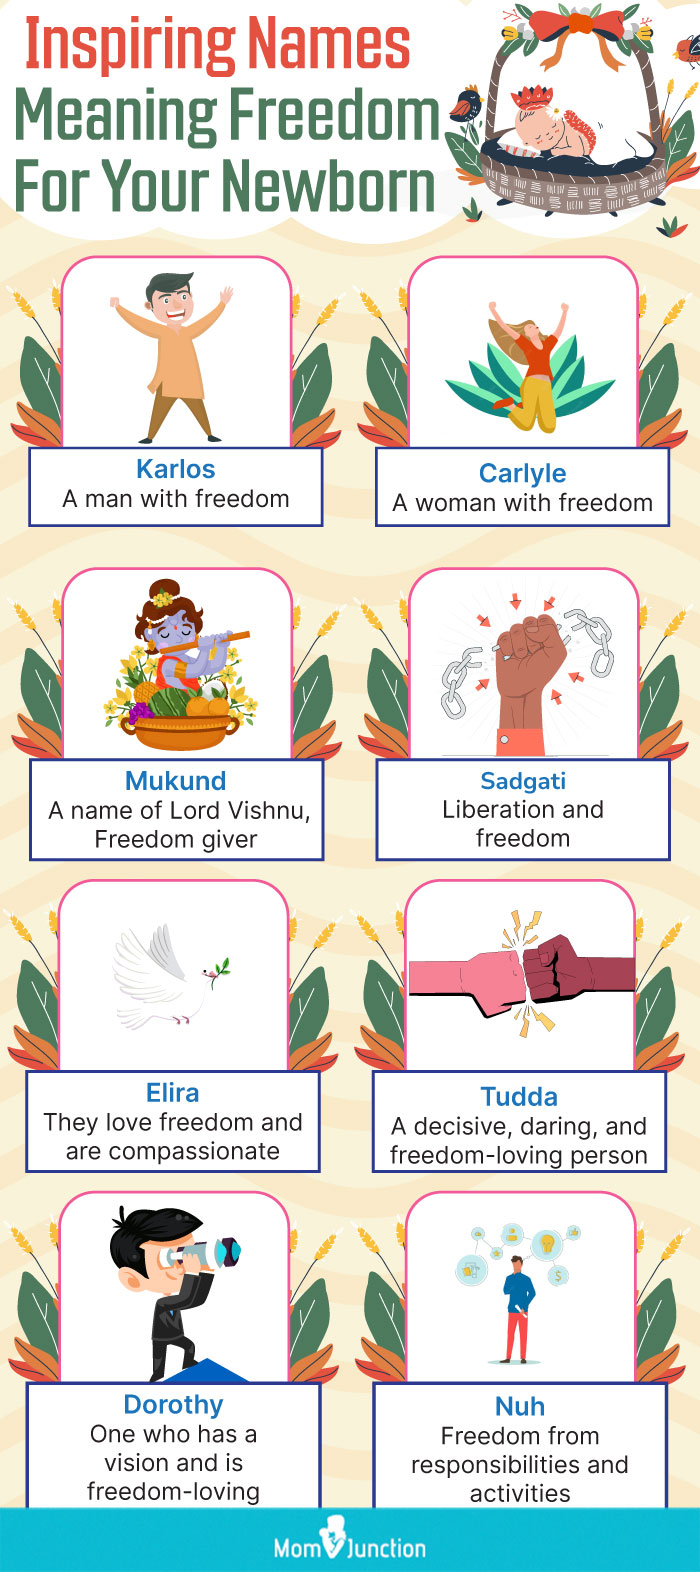 inspiring names meaning freedom for your newborn (infographic)